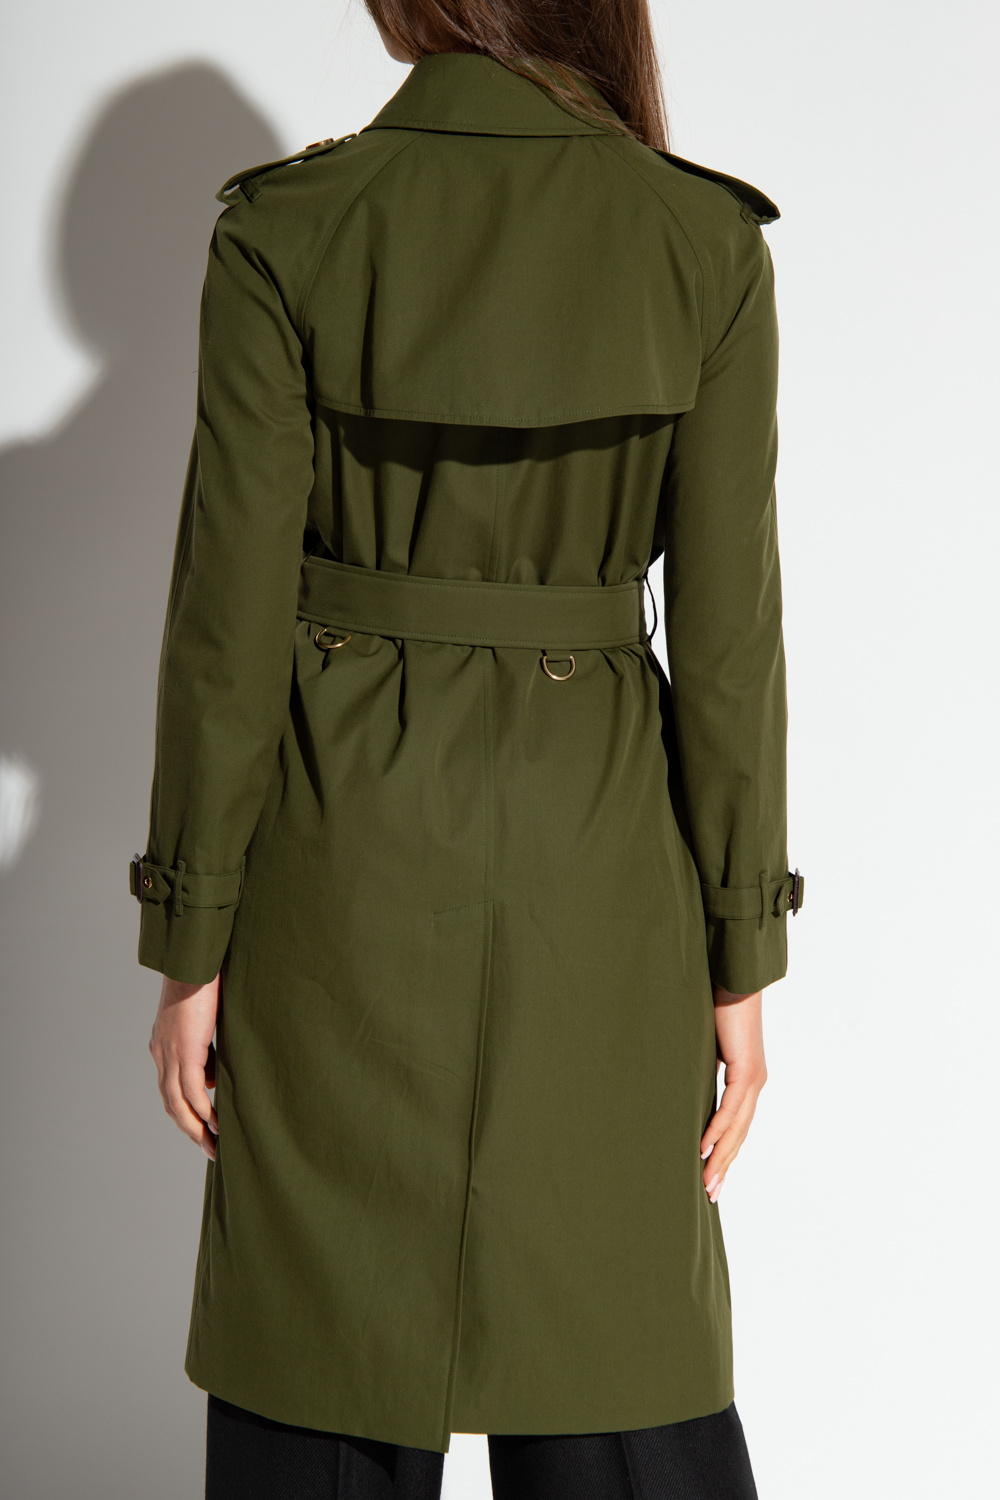 Green 'Waterloo' double-breasted trench coat Burberry - Vitkac France